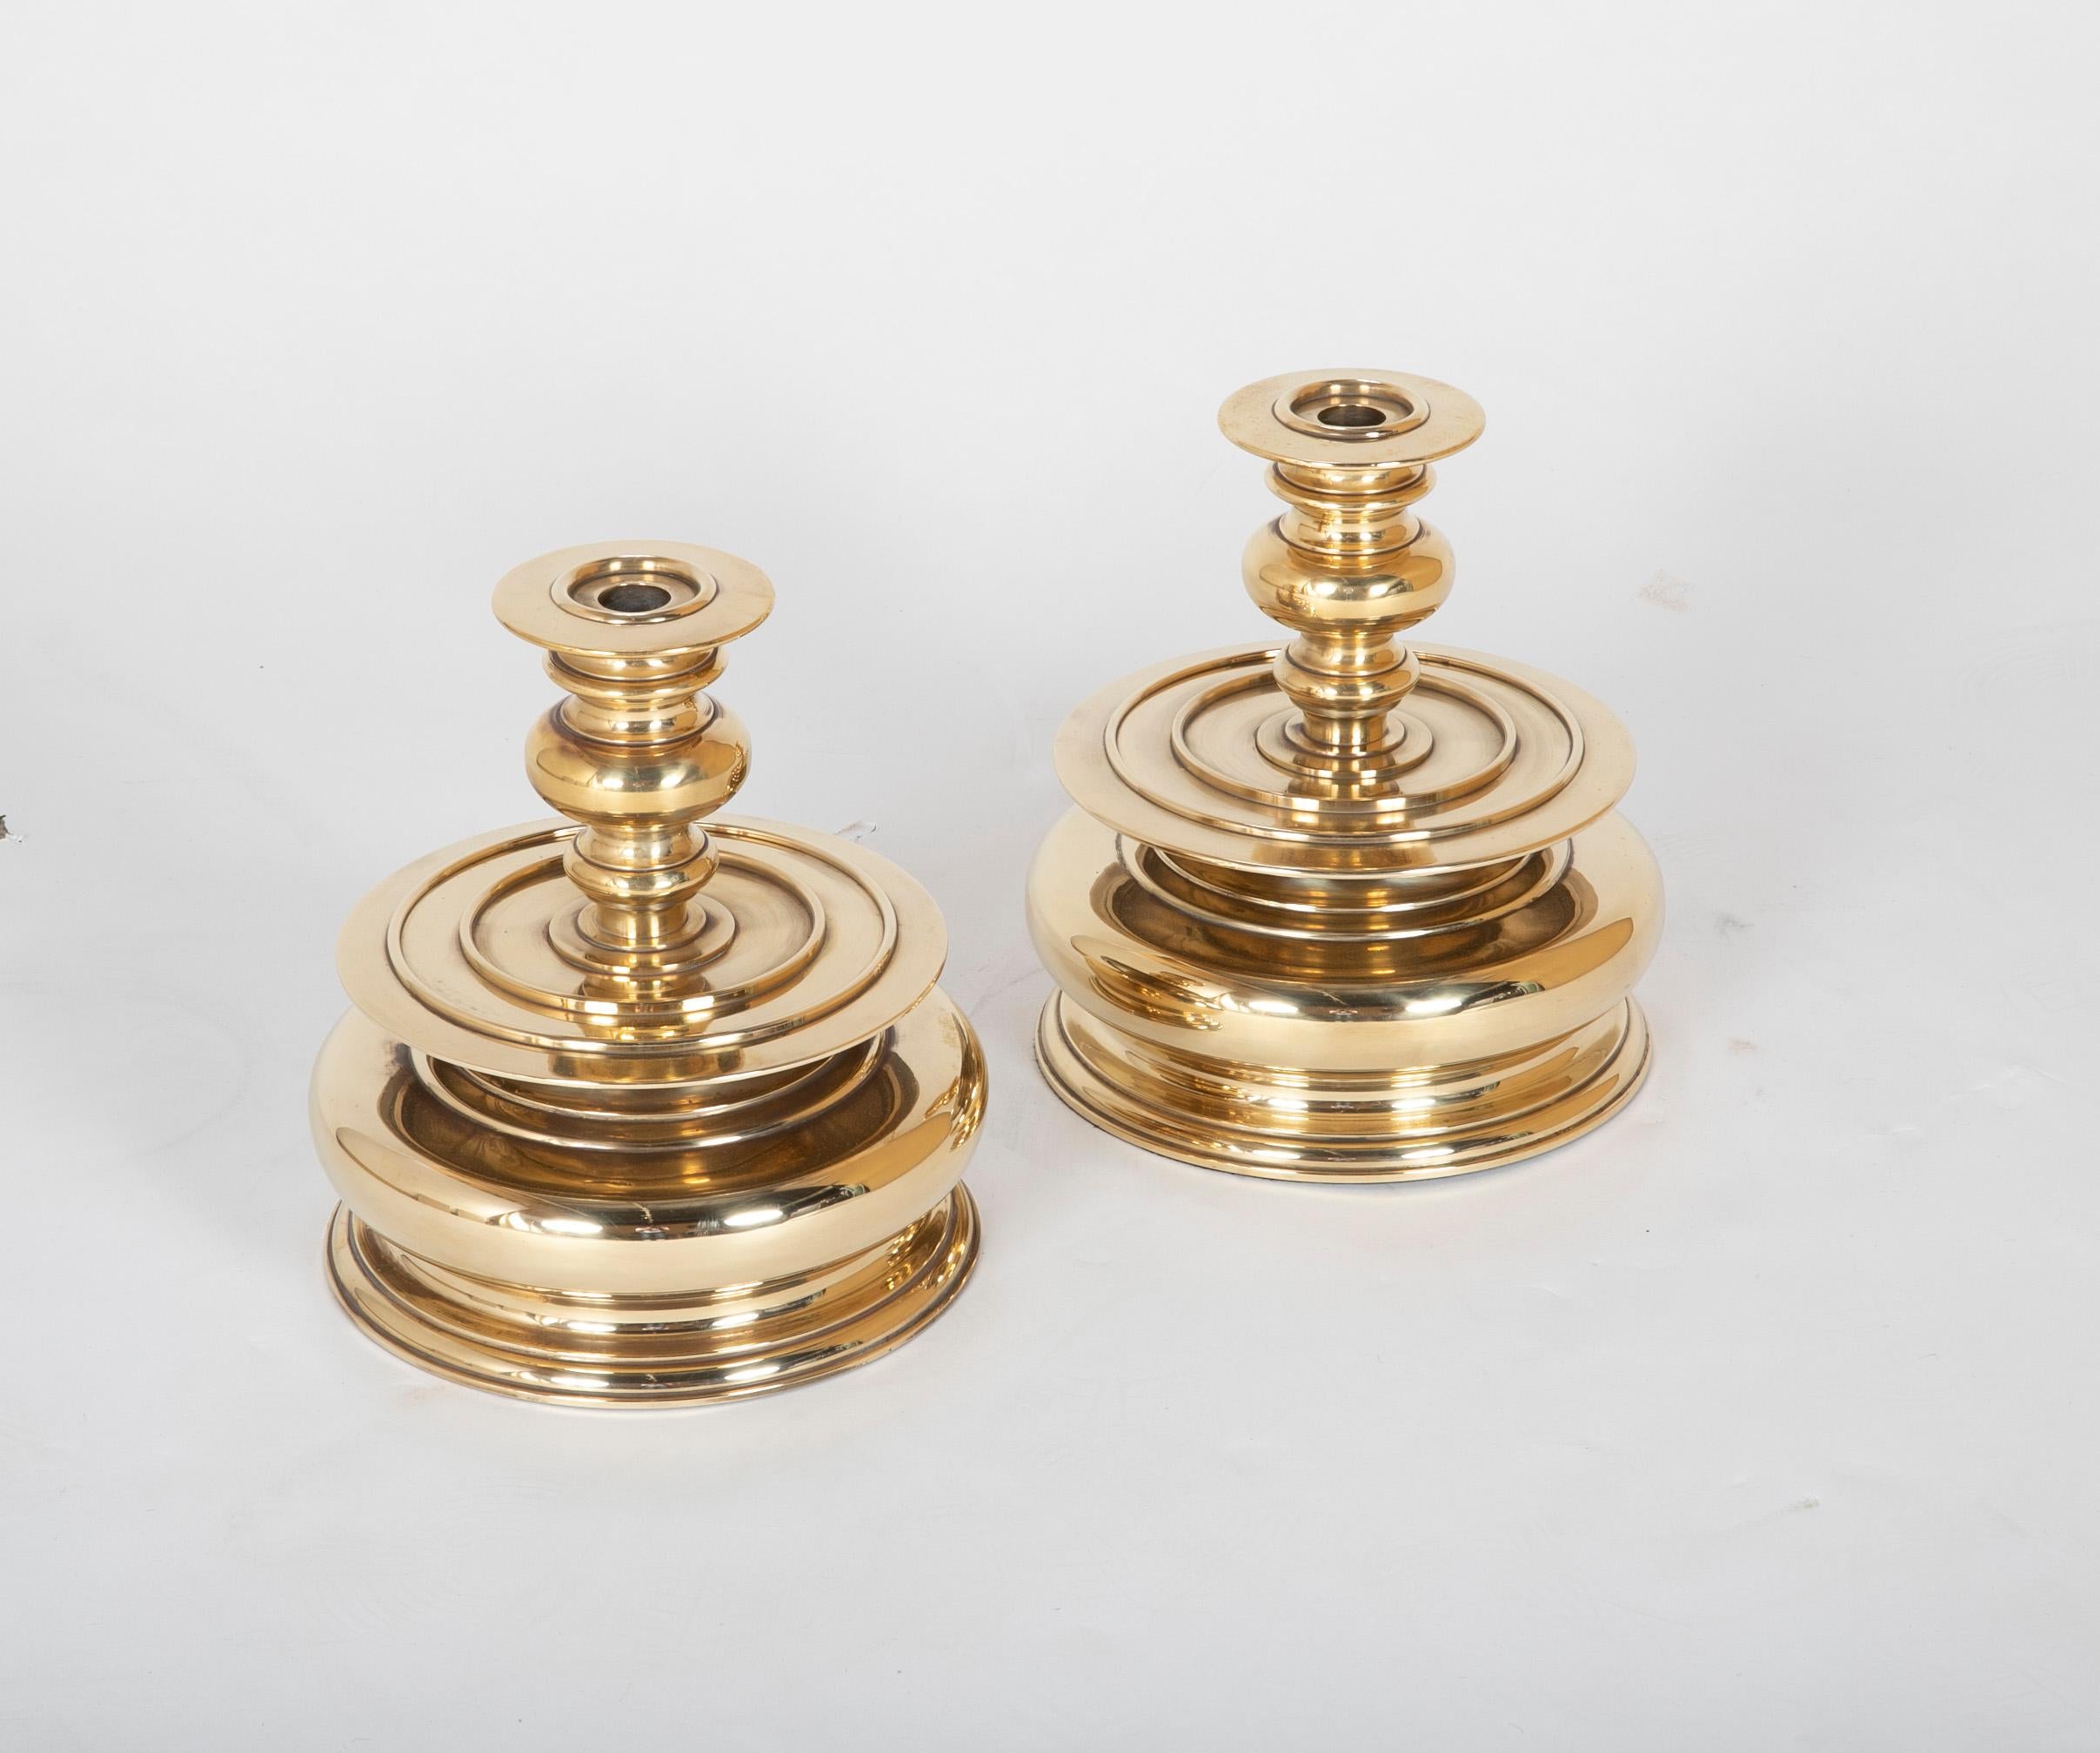 Pair of Monumental Brass Hurricane Lamps by Chapman at 1stDibs